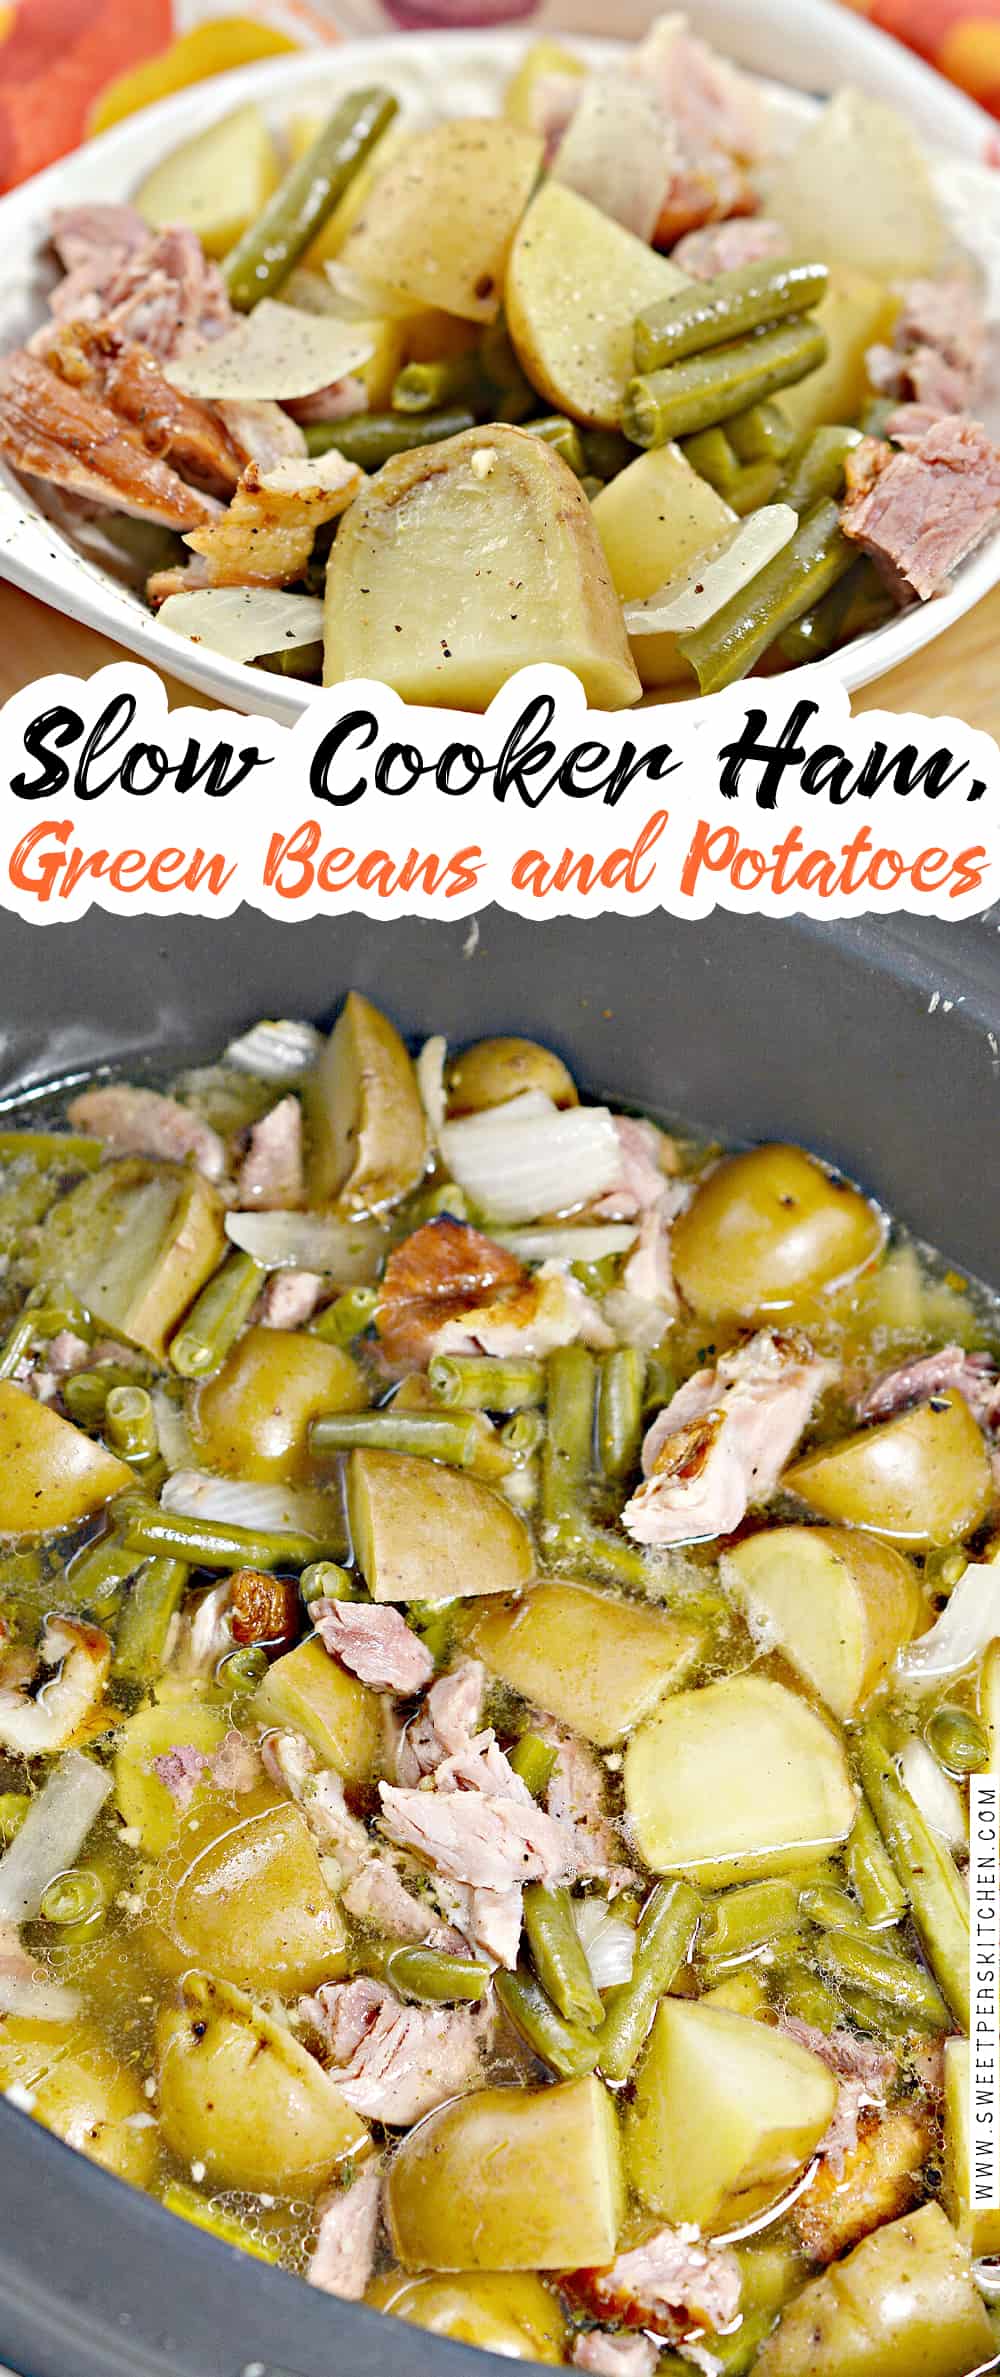 Slow Cooker Ham, Green Beans, and Potatoes